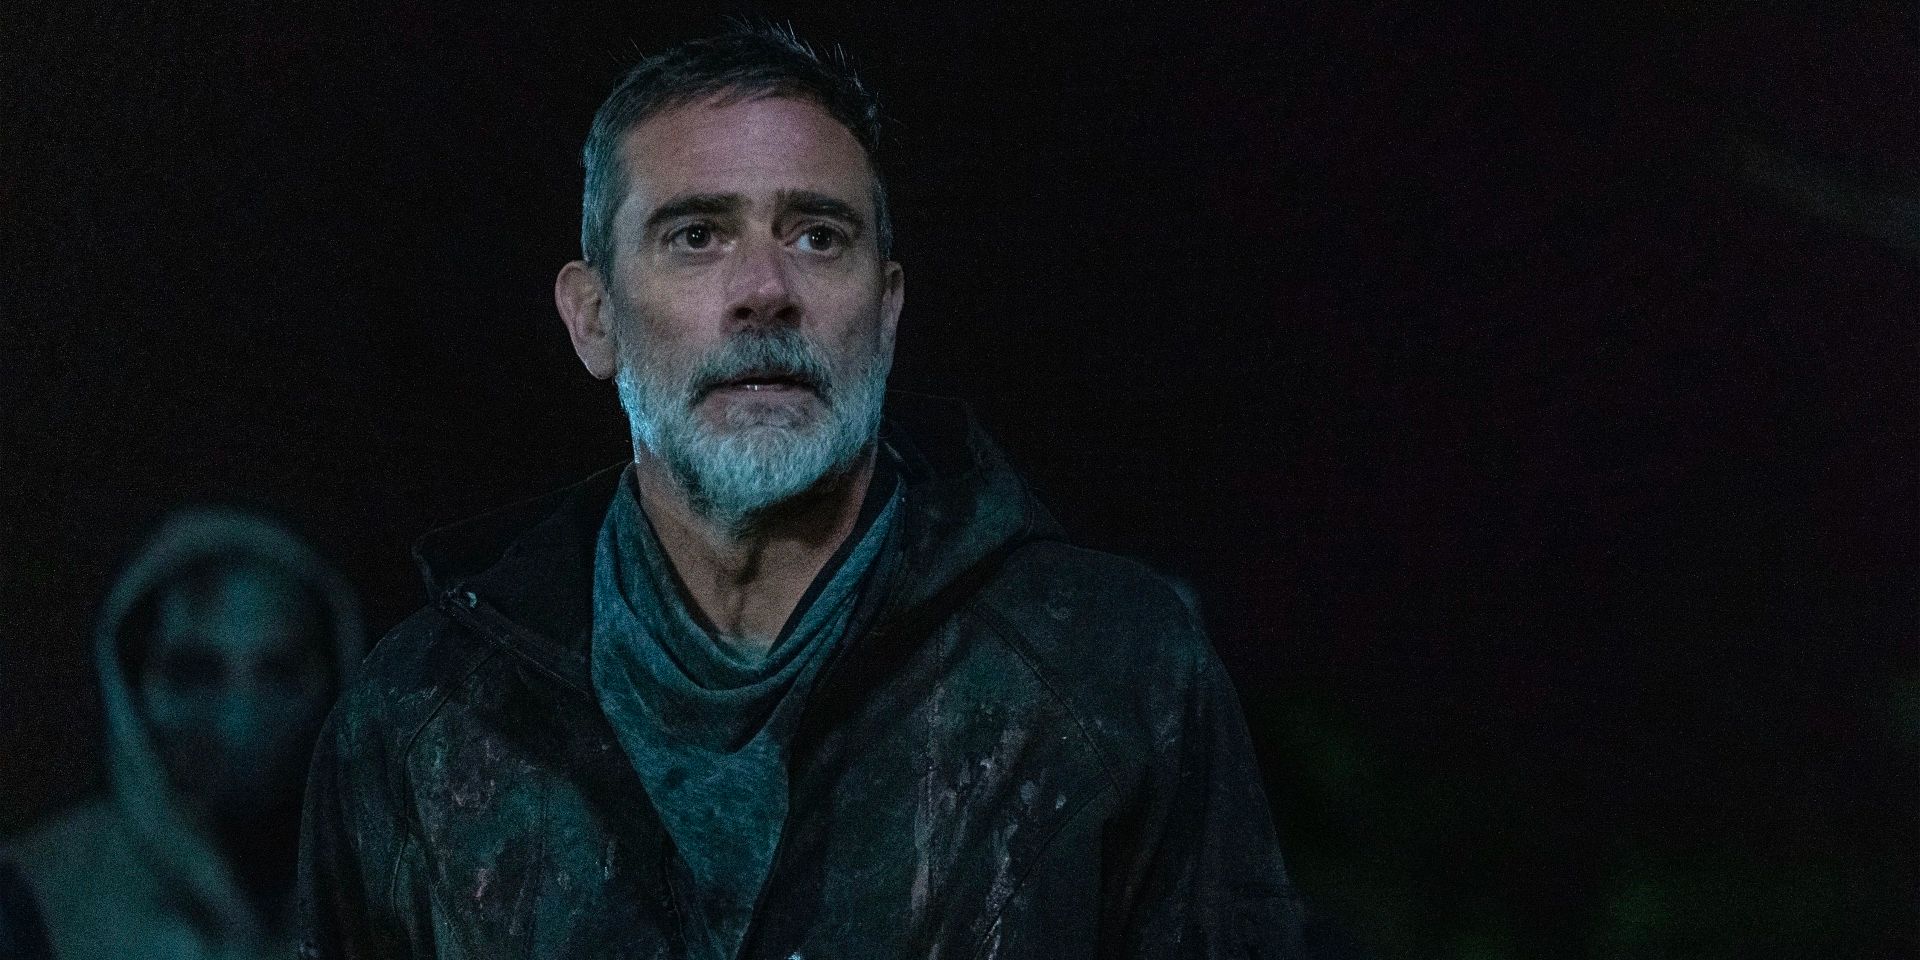 Negan looks disparagingly towards someone while standing in darkness. 